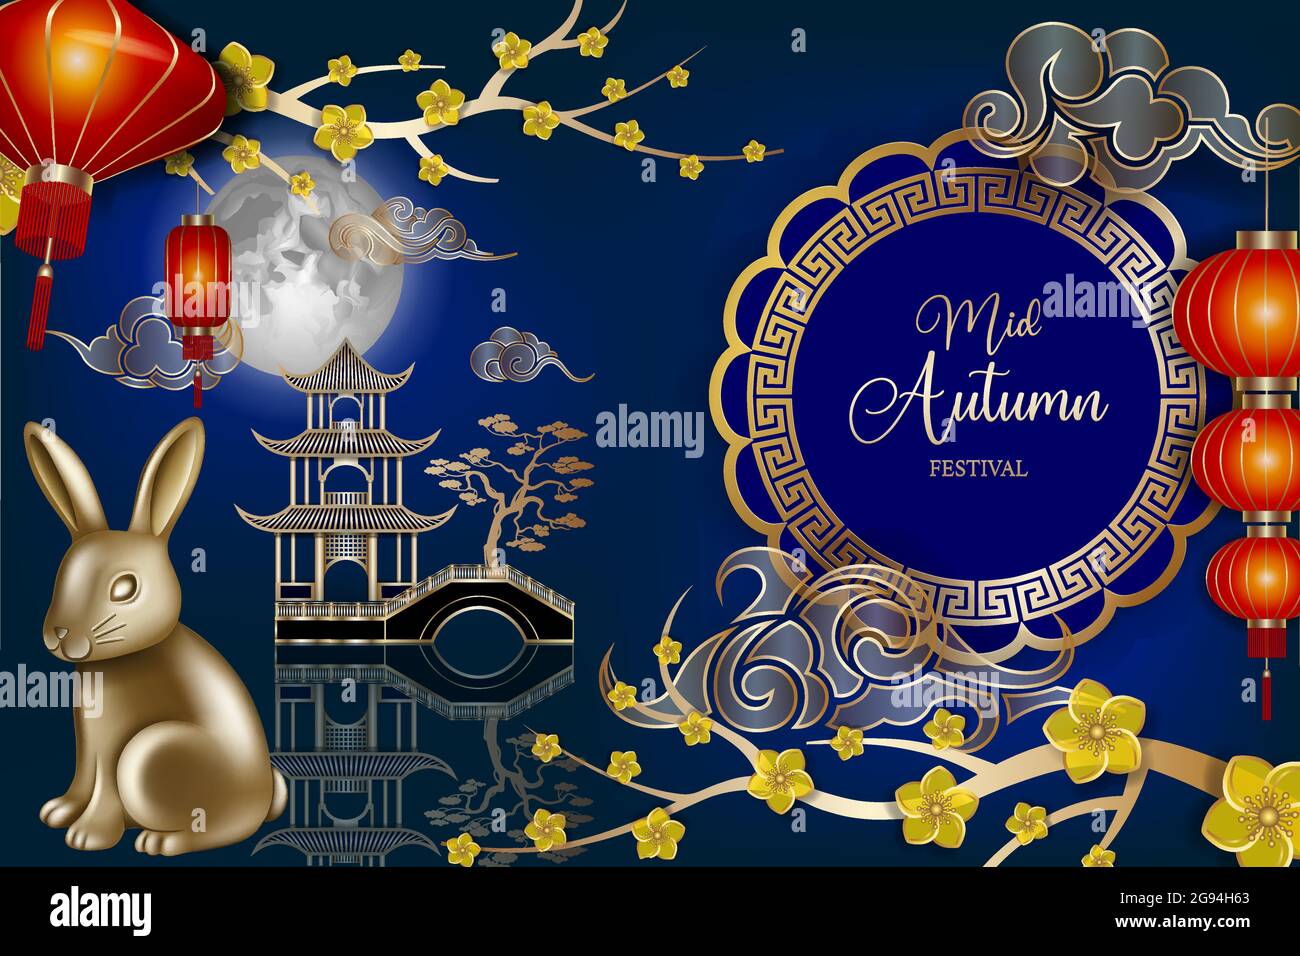 Chinese mid autumn festival background with red lanterns, gold rabbit, flowers and decorations Stock Vector